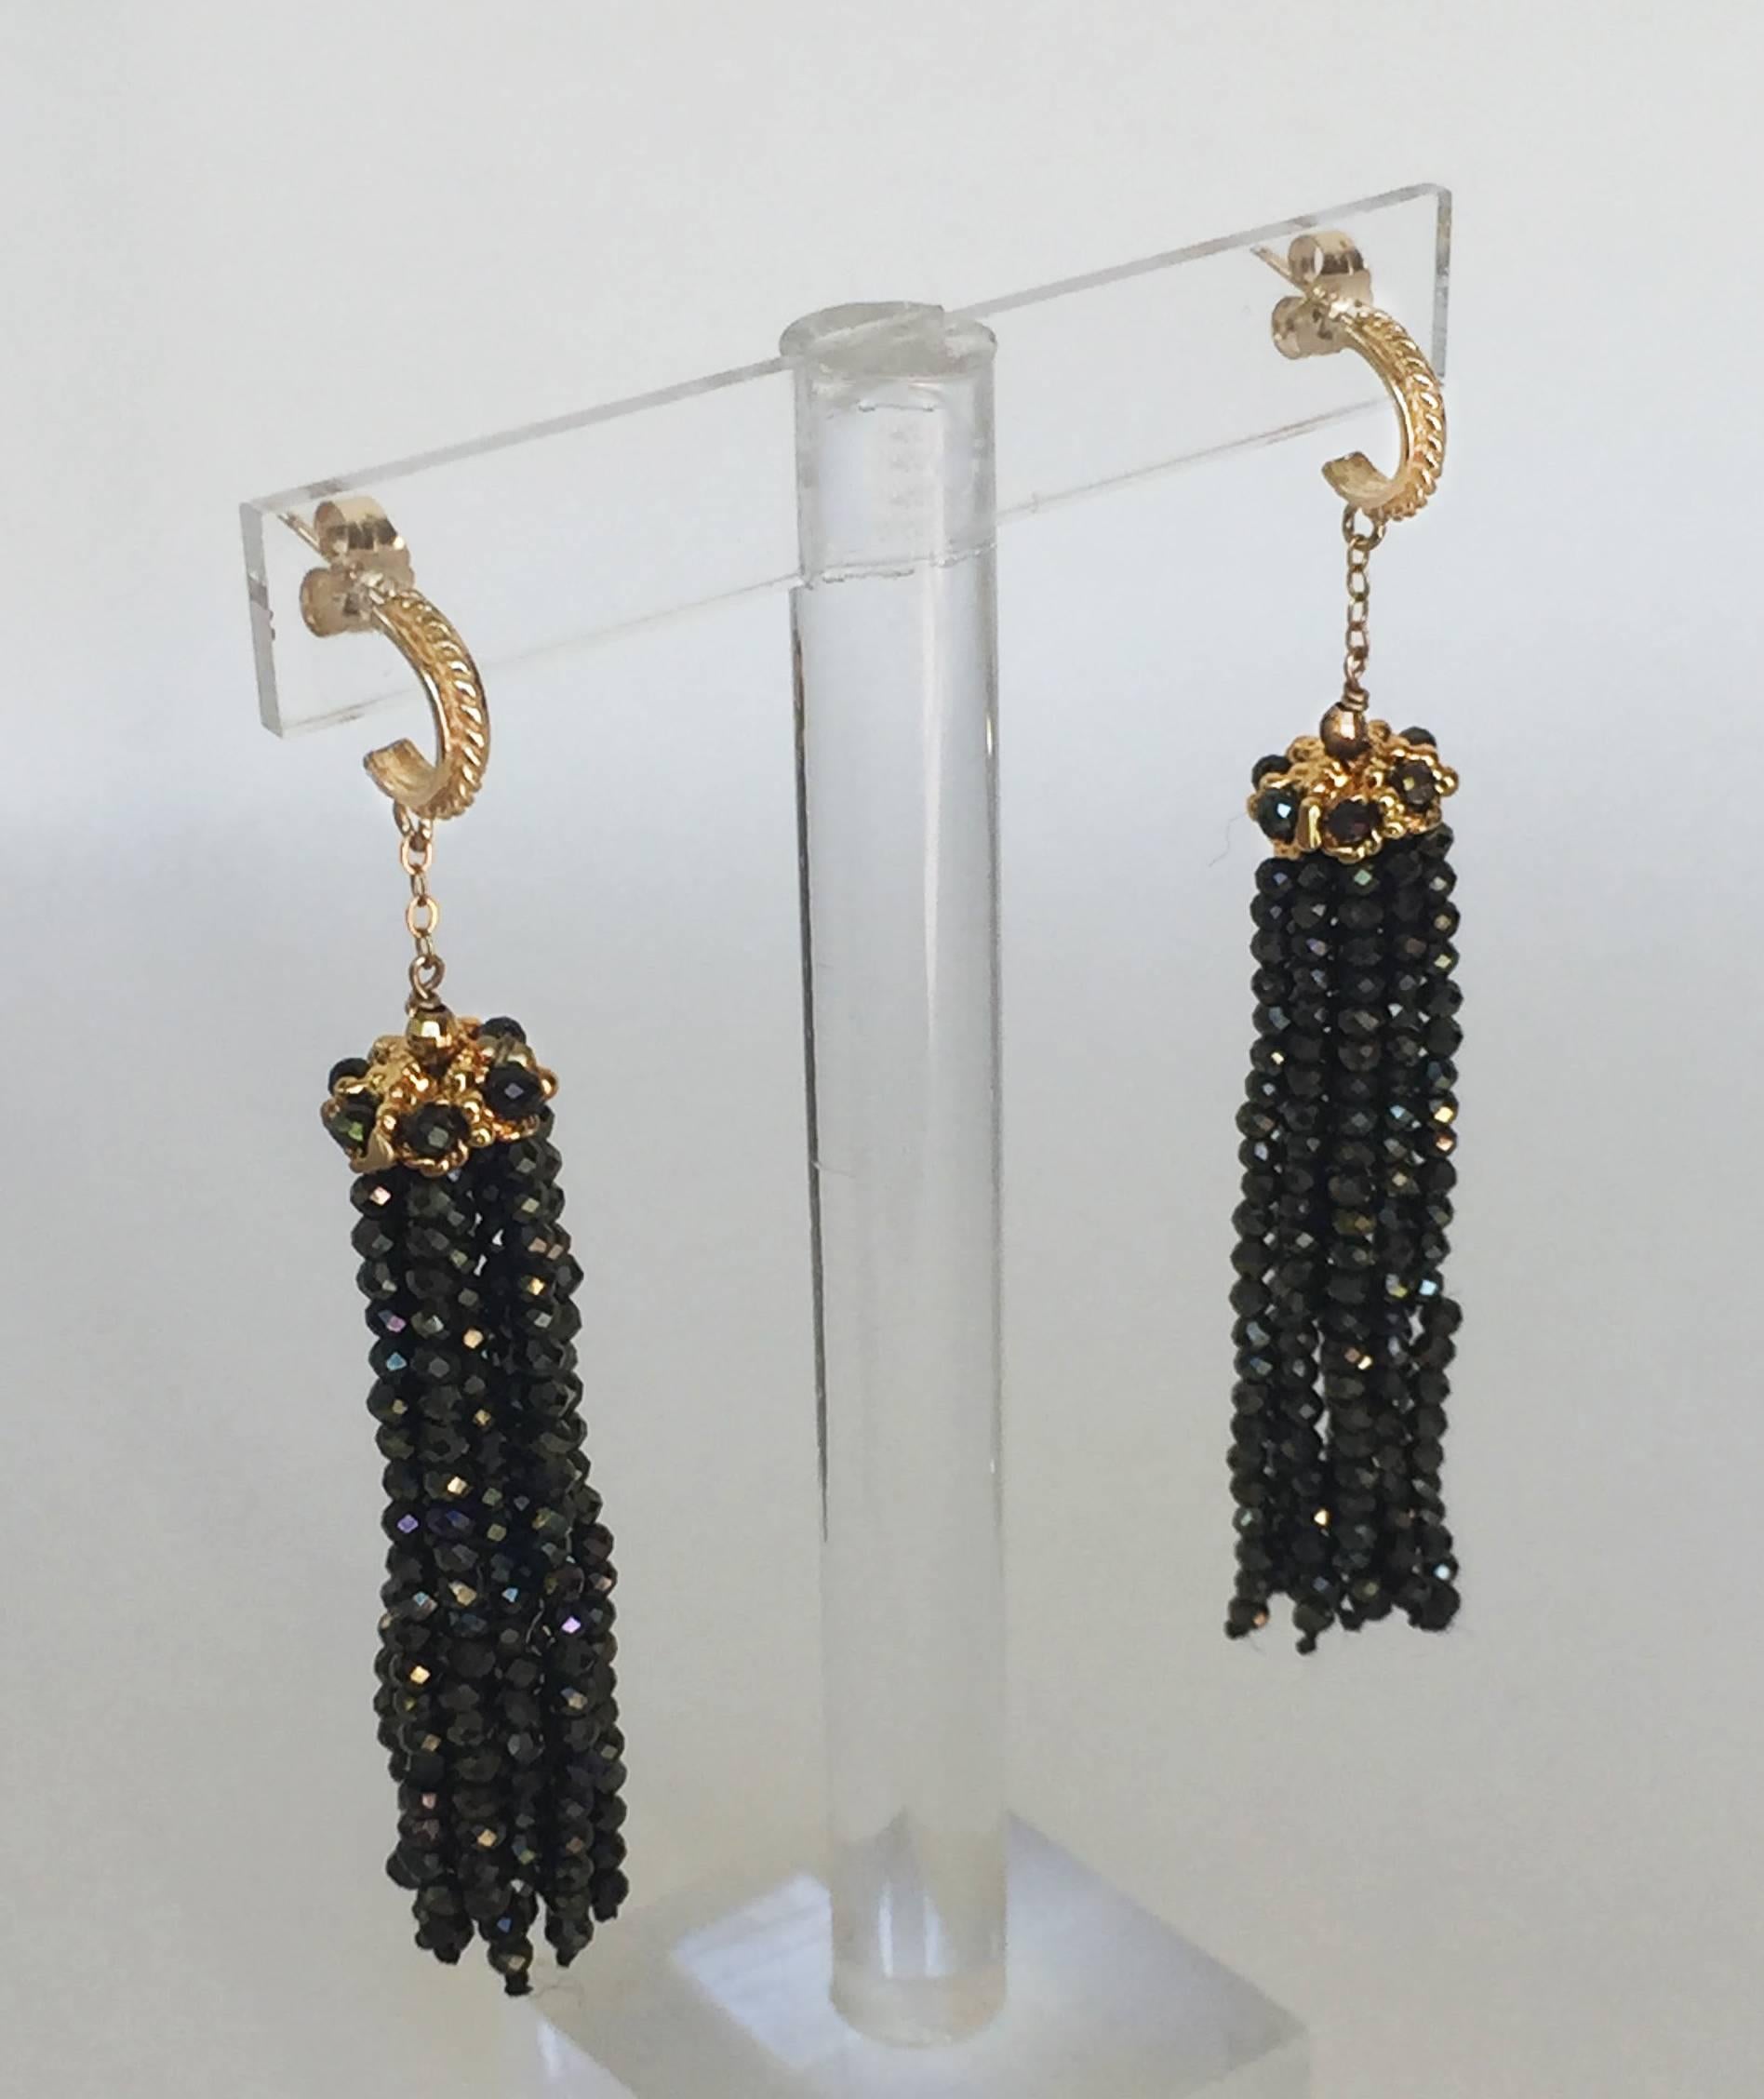 The black spinel beaded tassels sparkles a golden hue as it catches the light. At 2.5 inches, the earrings frame the face elegantly. At top the tassel is a 14k yellow gold cup with filigree and black spinel woven through. Completing the earrings are